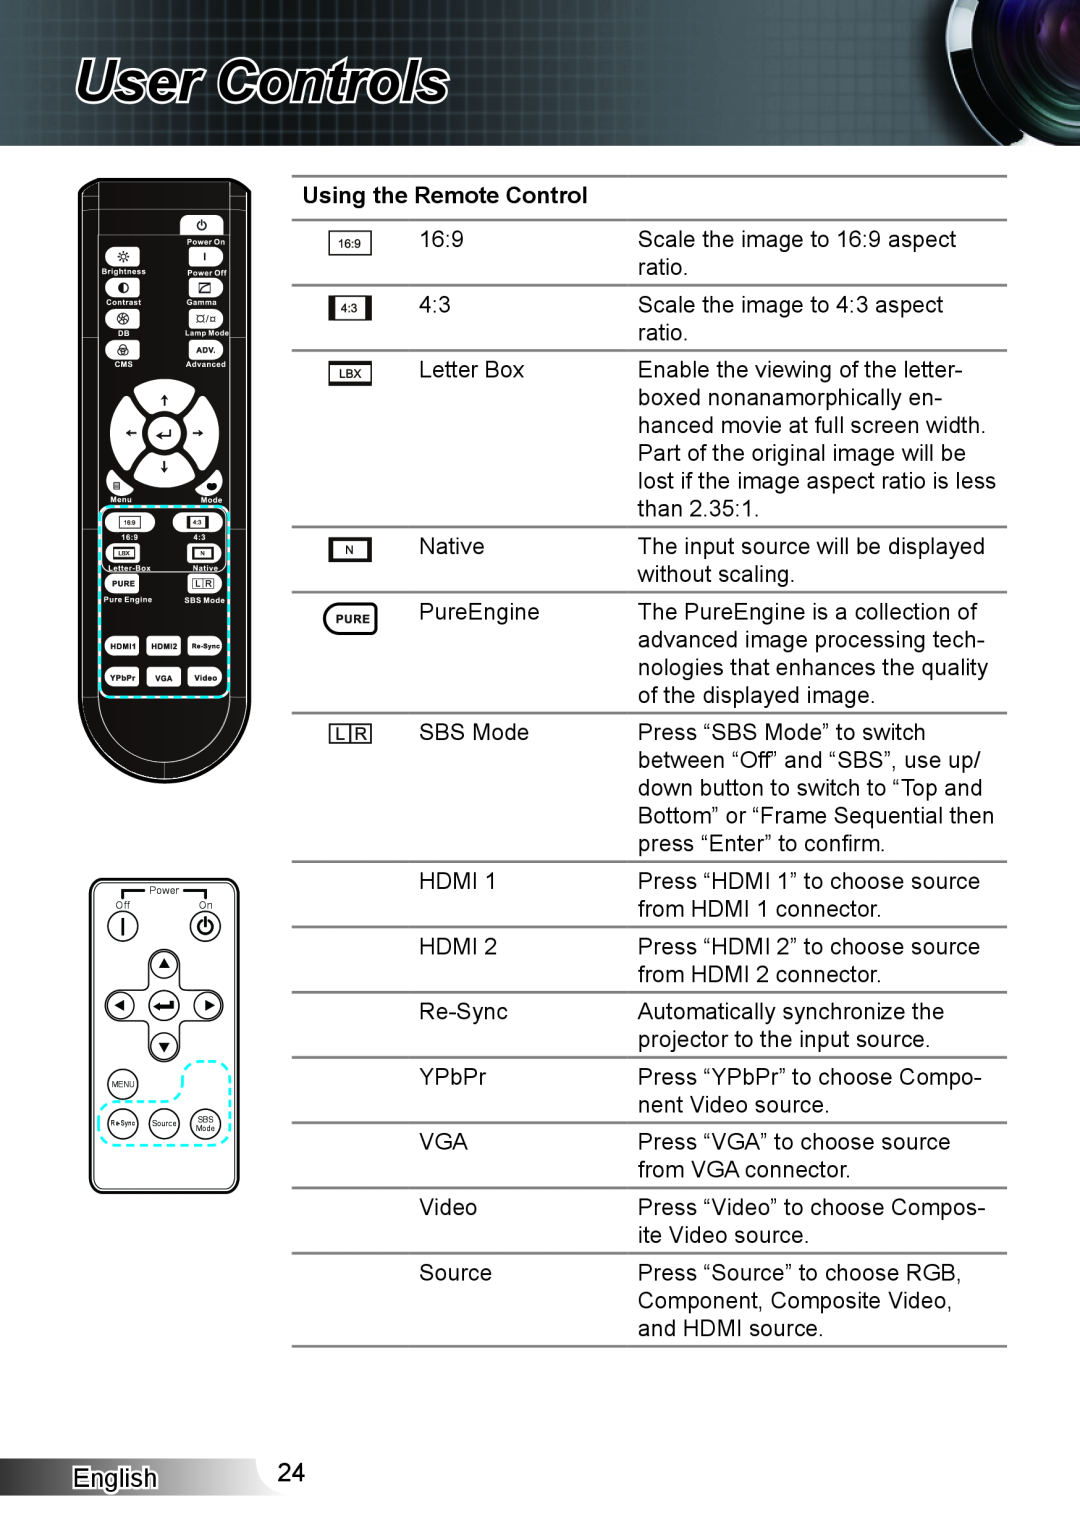 Optoma Technology XX152 N manual User Controls, English, Using the Remote Control, lost if the image aspect ratio is less 